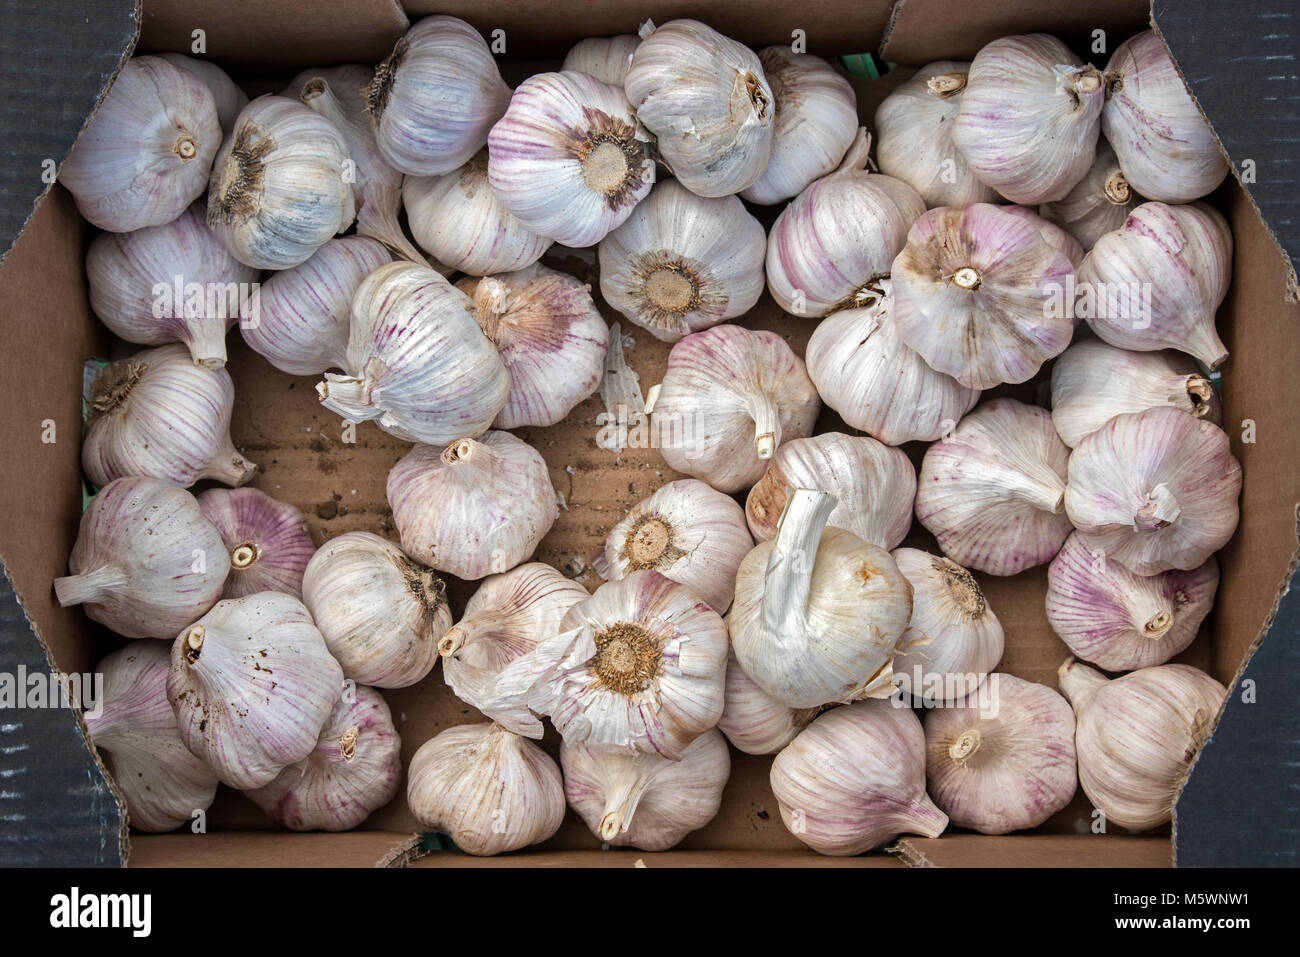 Tube gia garlic puree hi-res stock photography and images - Alamy